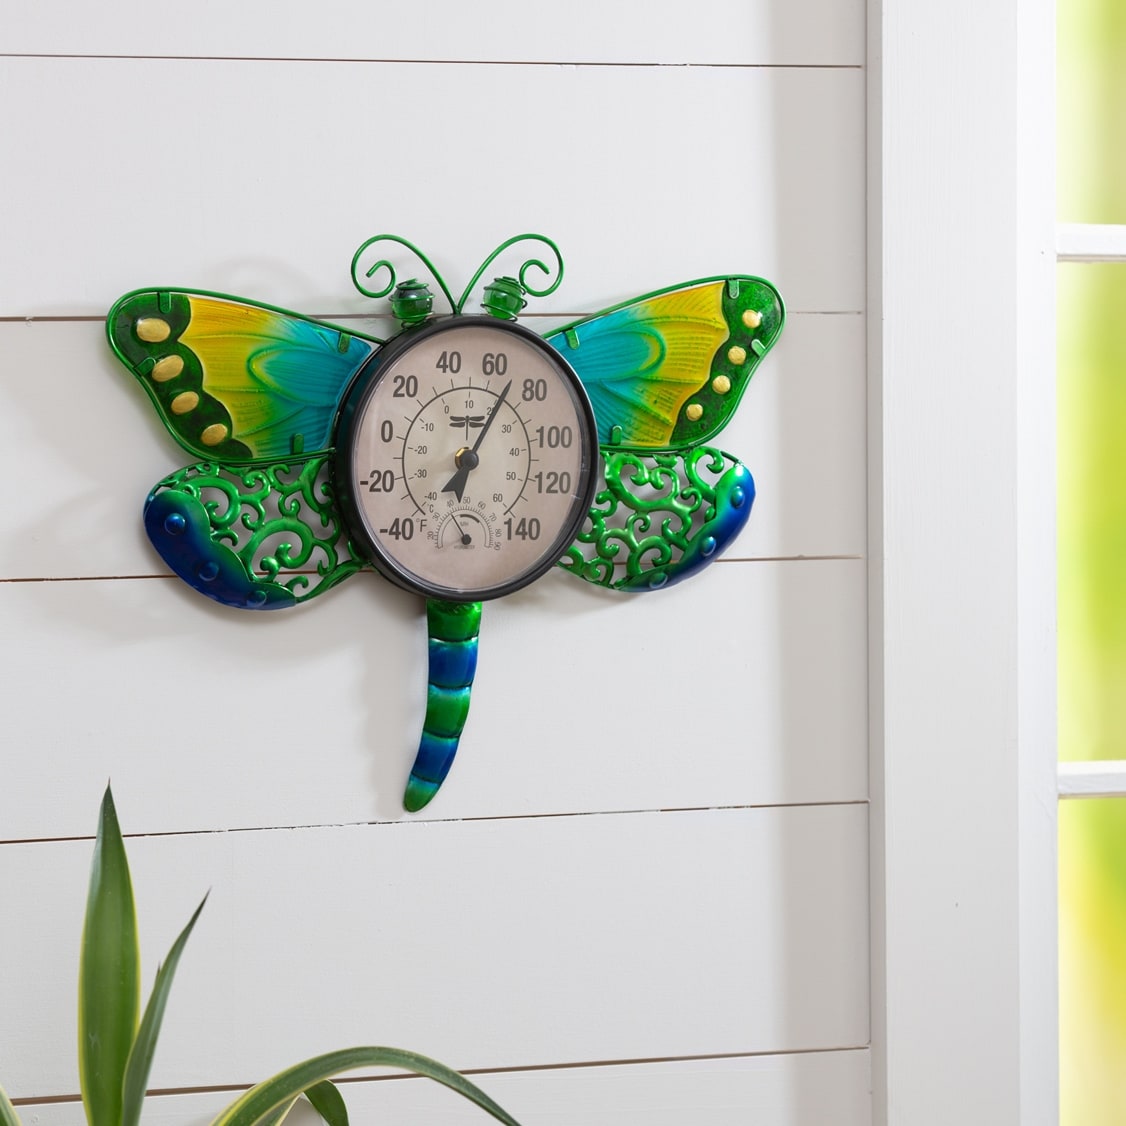 https://ak1.ostkcdn.com/images/products/is/images/direct/662a7c2a42c064f8c229eab7579b62a0b76b240a/Dragonfly-Outdoor-Wall-Thermometer.jpg